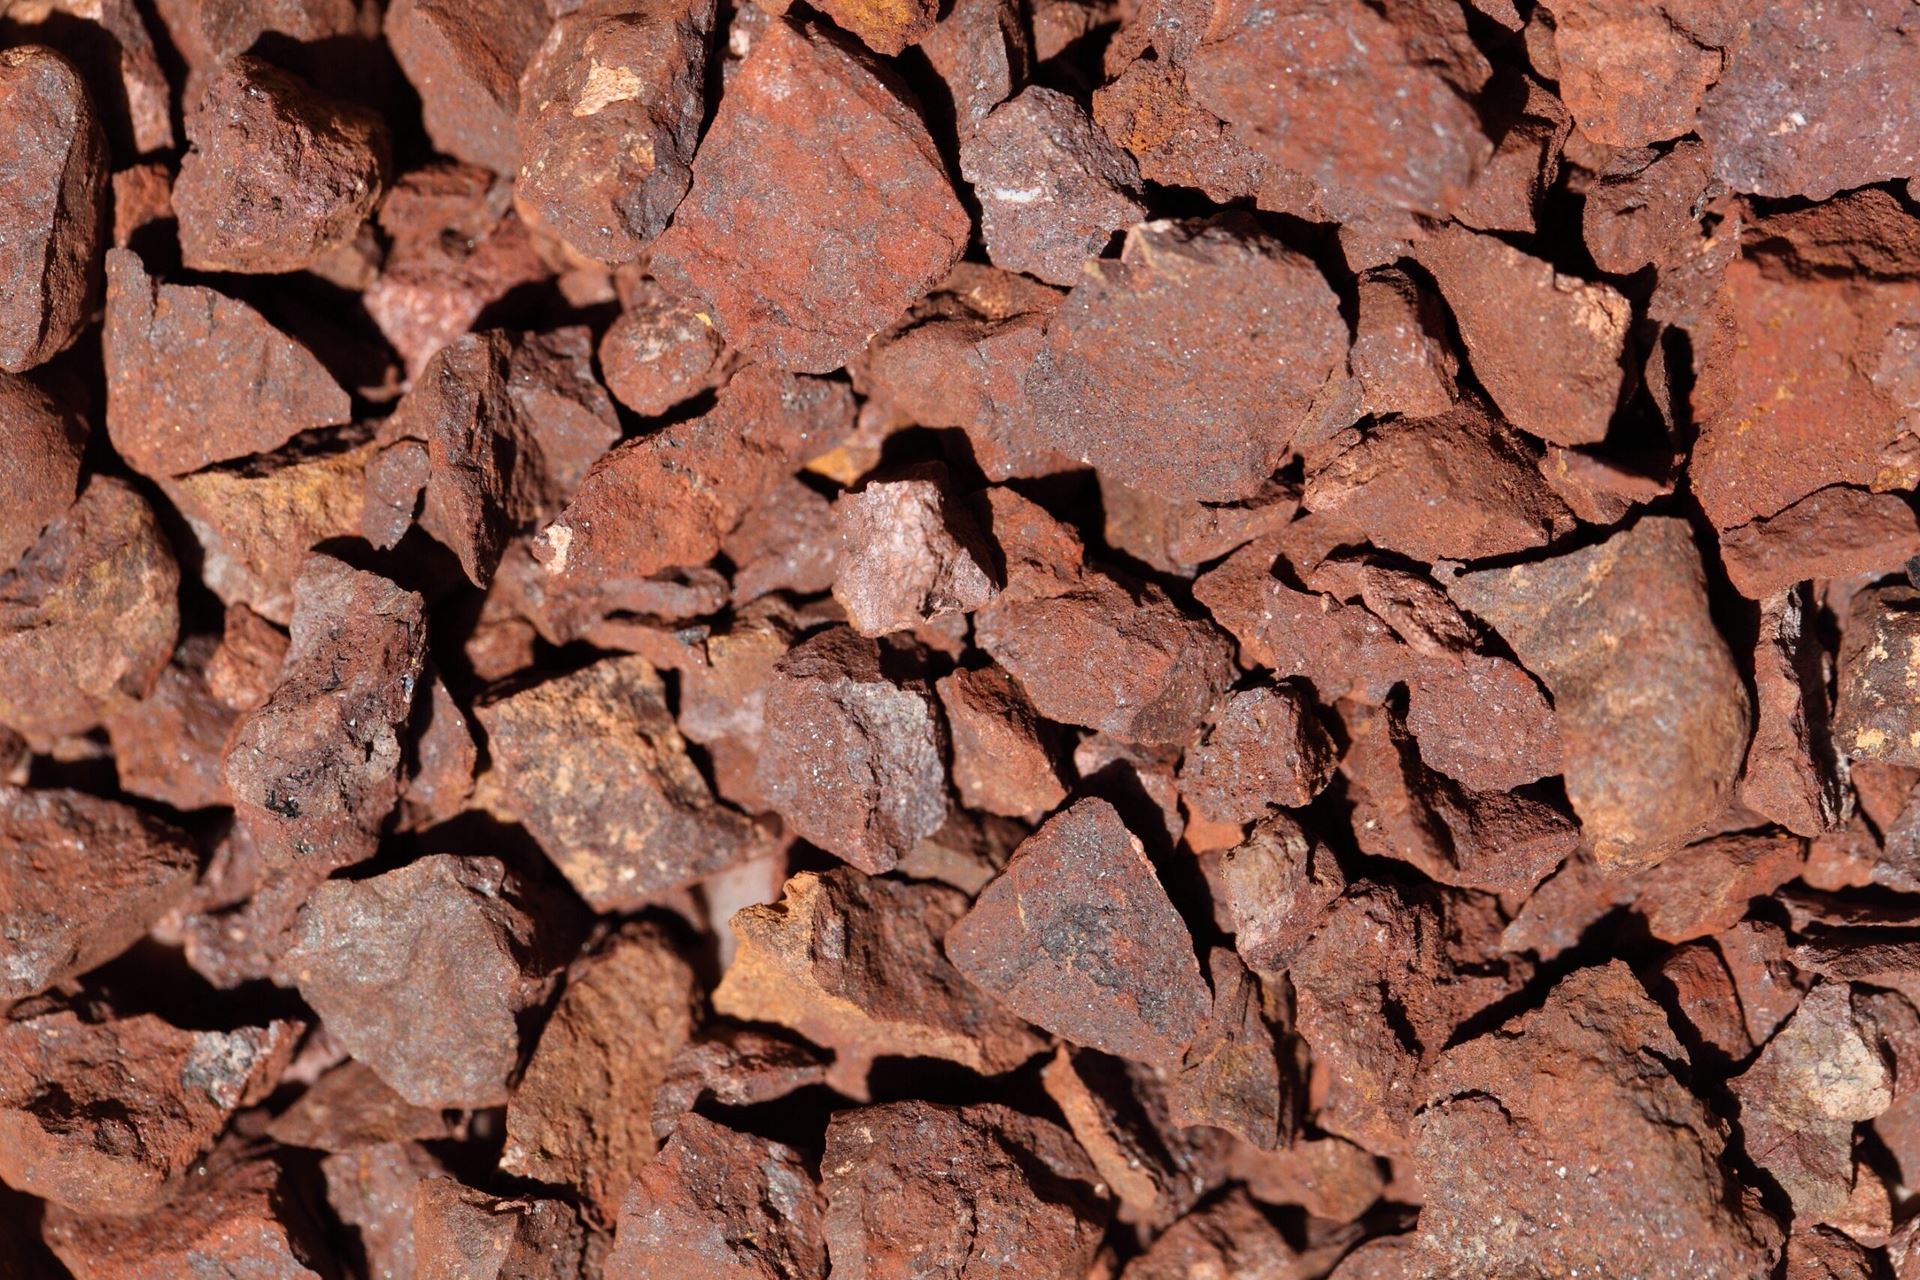 Canadian iron ore production decreased by 3.3% in August